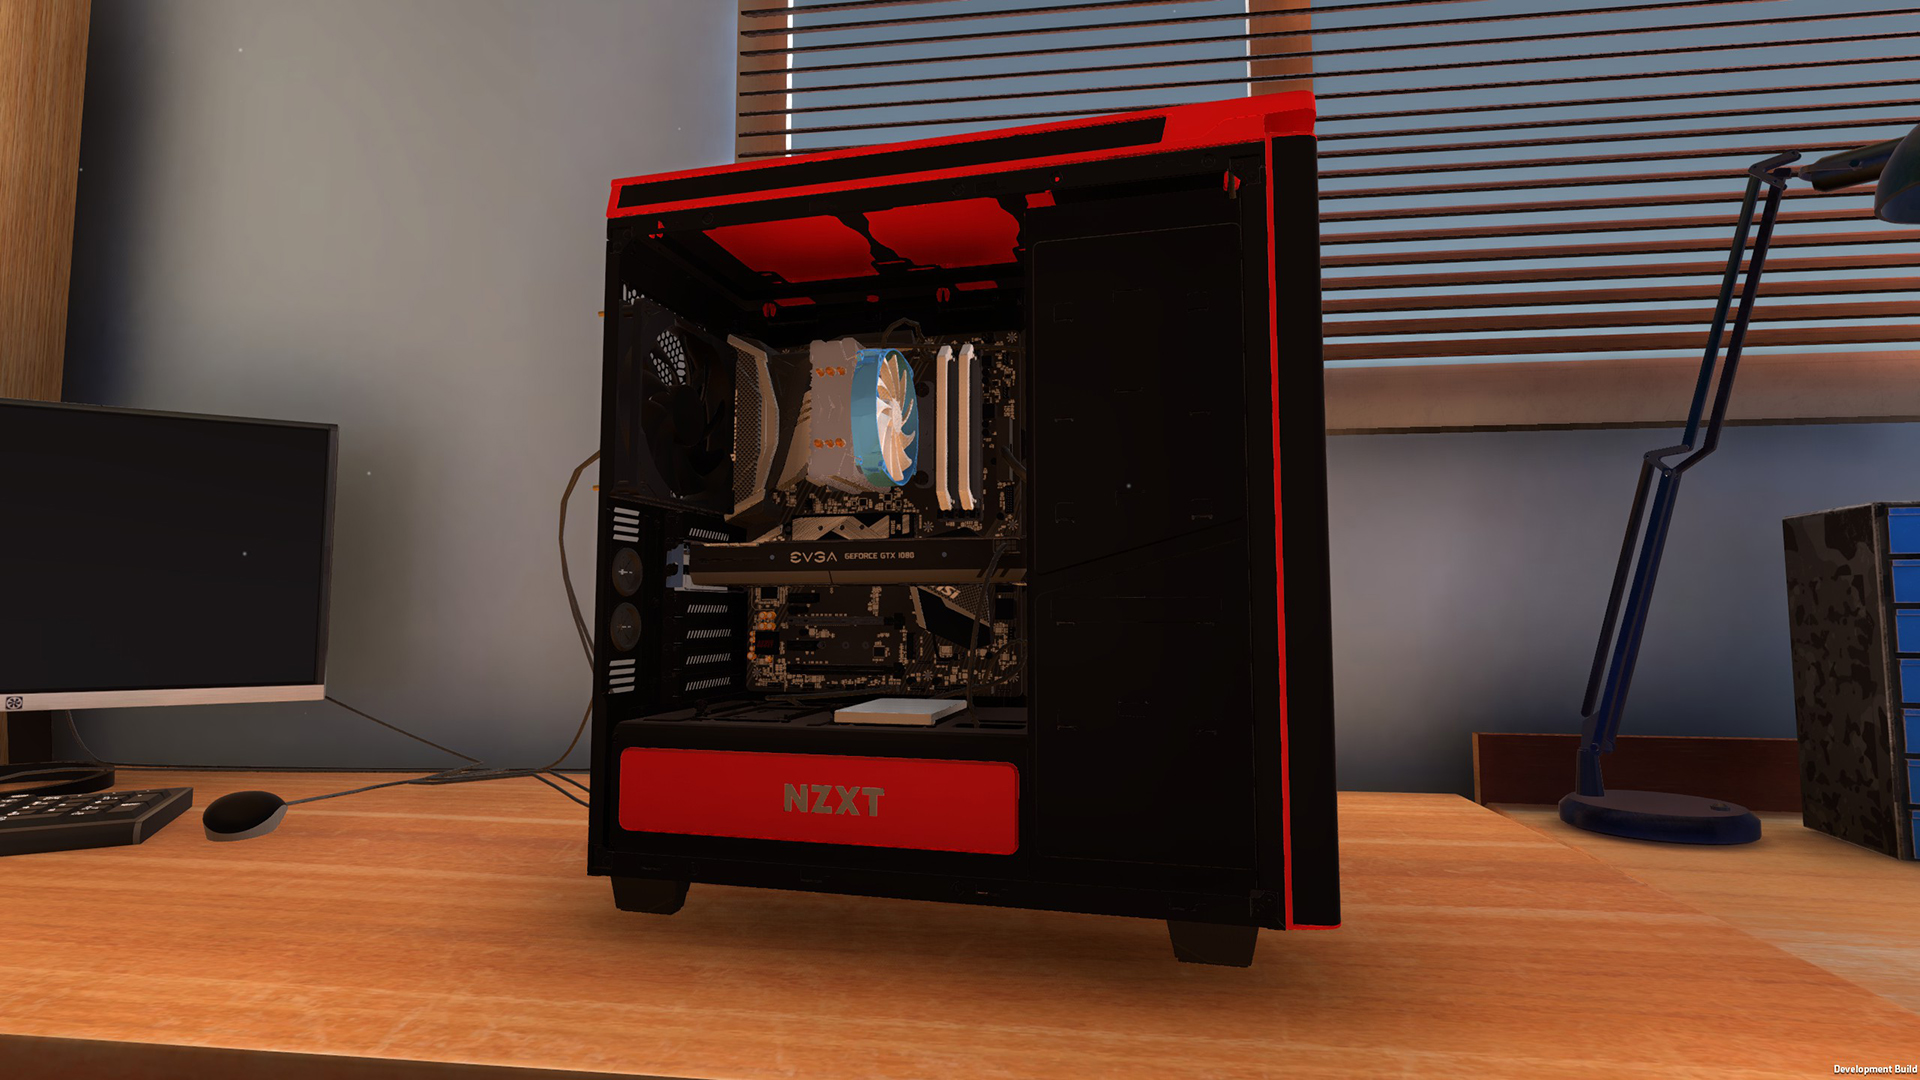 PC Building Simulator sells 100k copies in first month